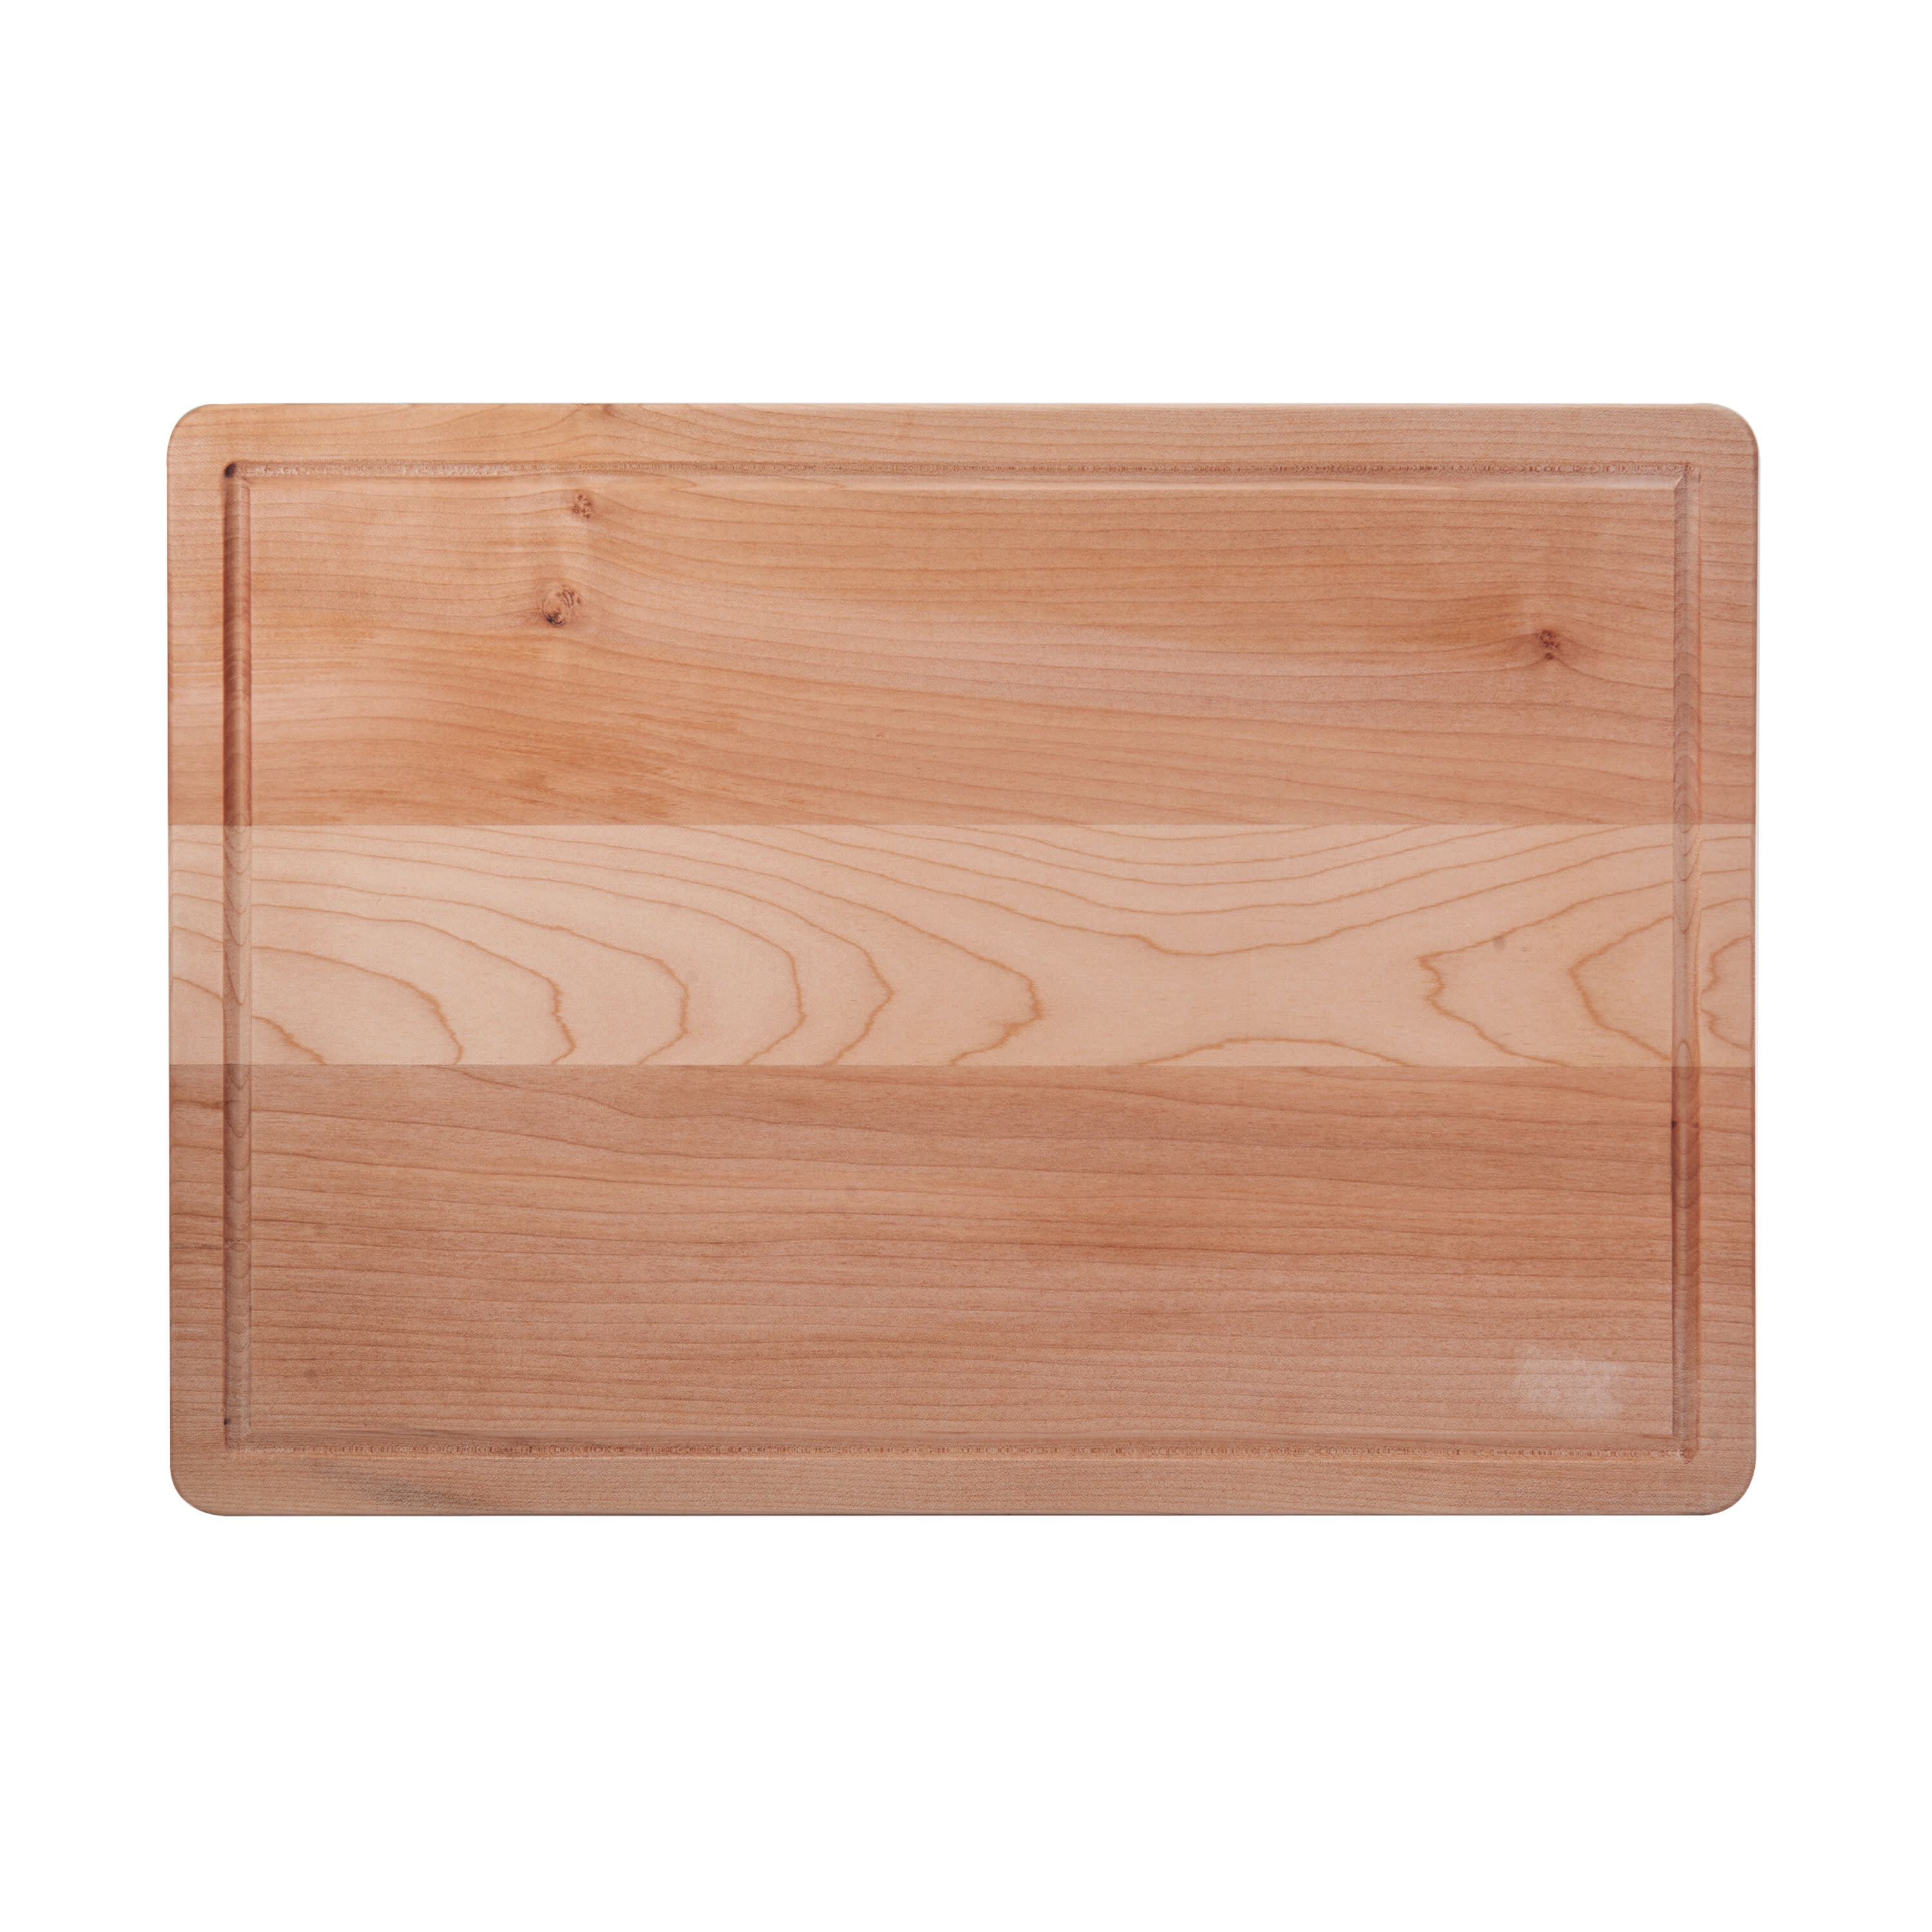 Bamboo Wooden Chopping Board Cutting Slicing Dicing Steel Sliding Tray Kitchen 